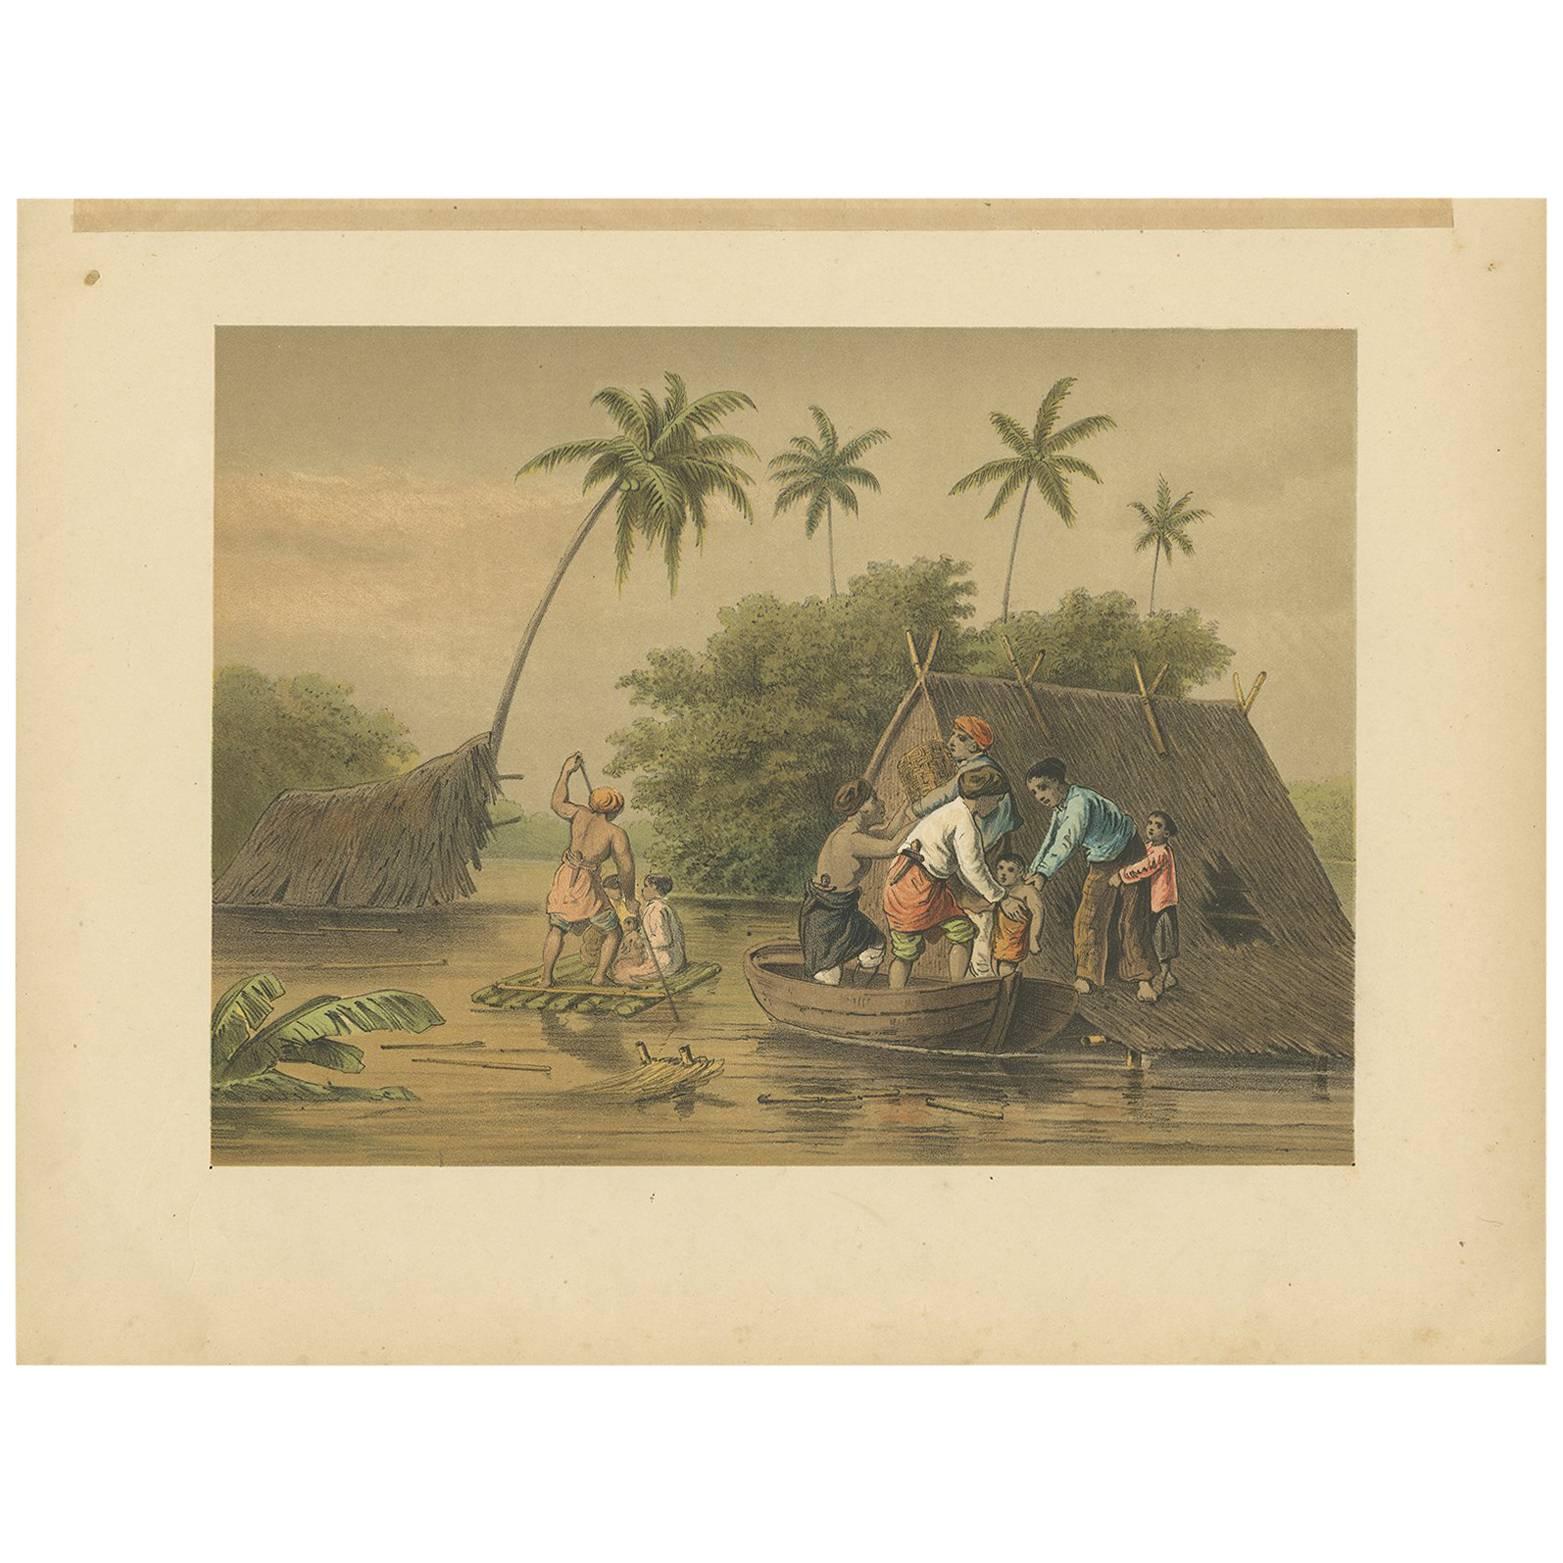 Antique Print of a Flooding near Tegal by M.T.H. Perelaer, 1888